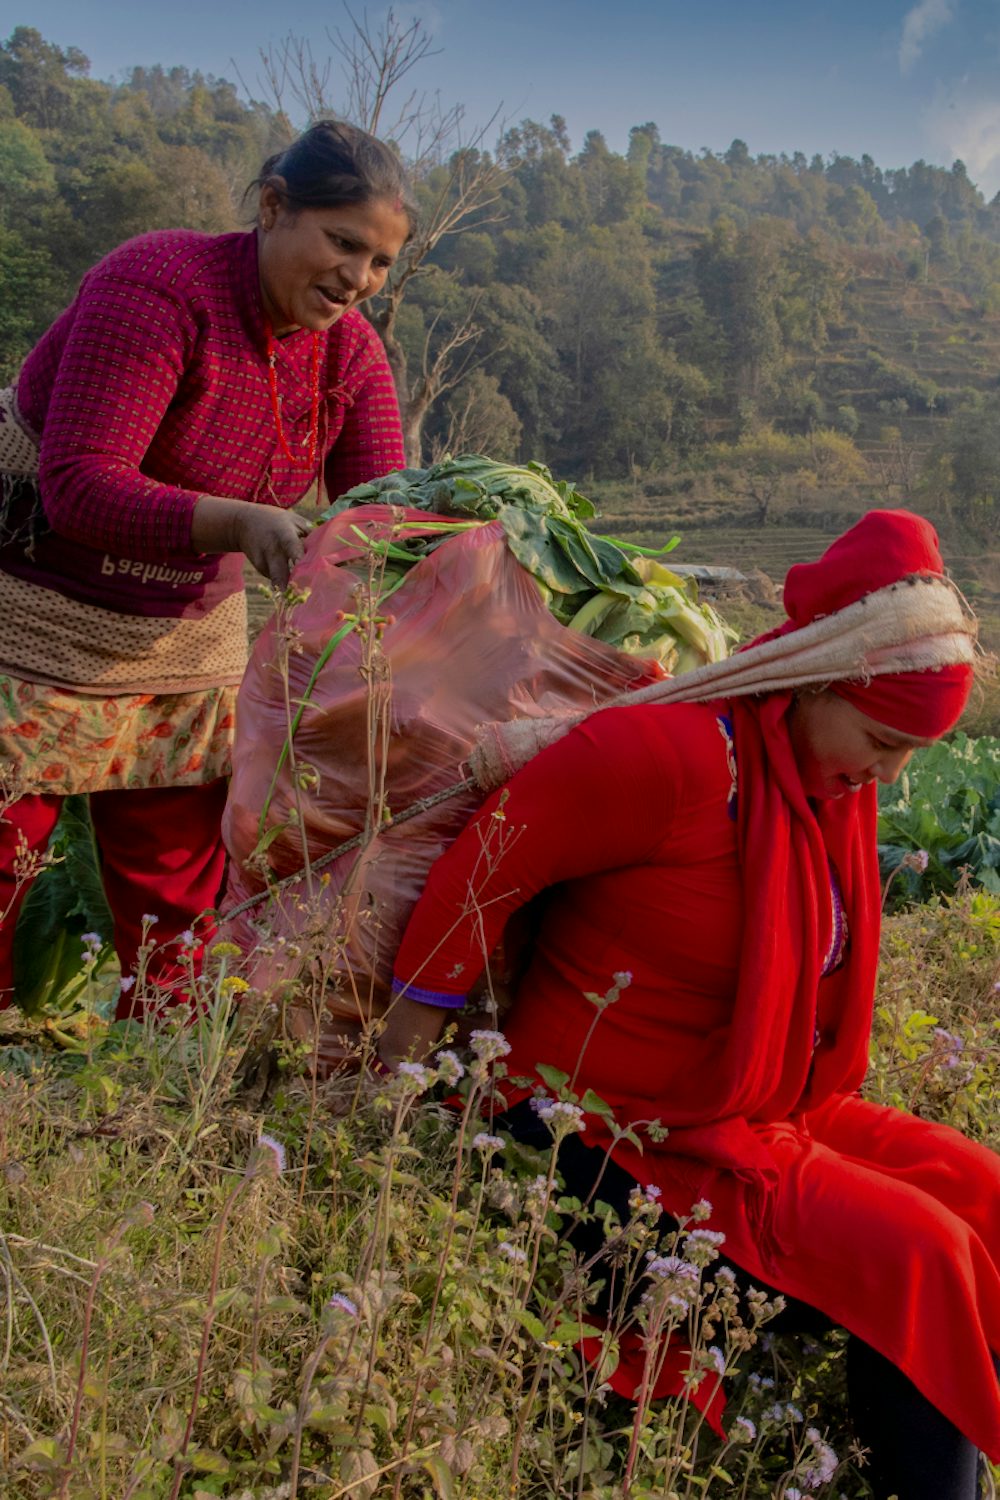 Women farmers collect vegetables from their fields.